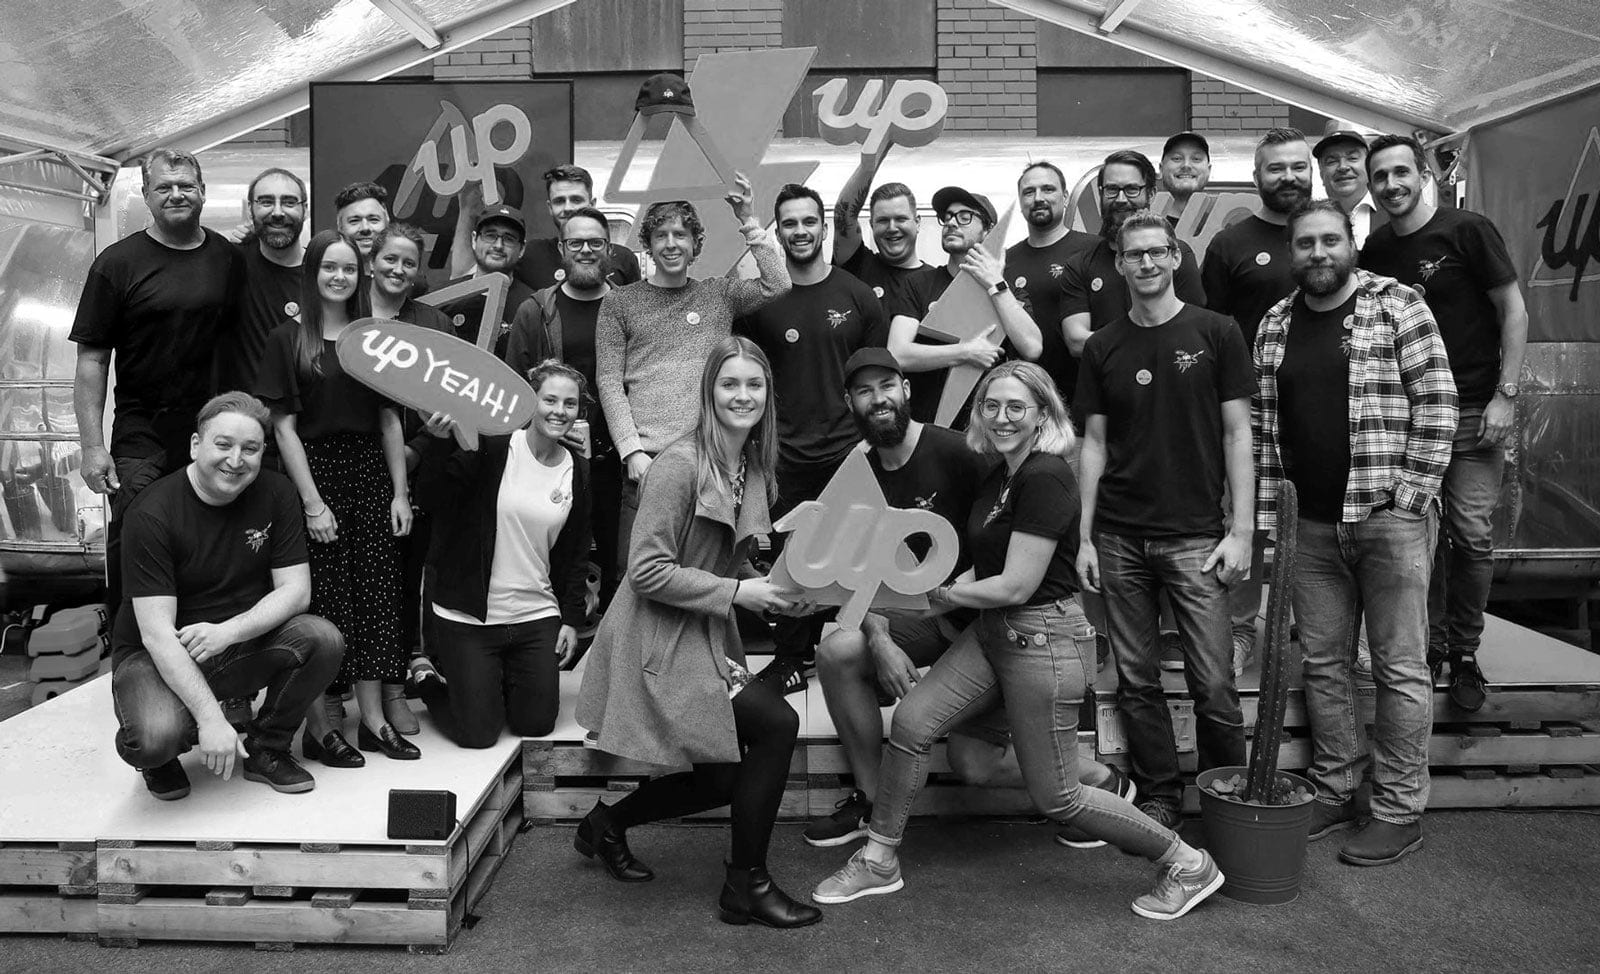 Upsiders celebrating at the Melbourne Up launch event.